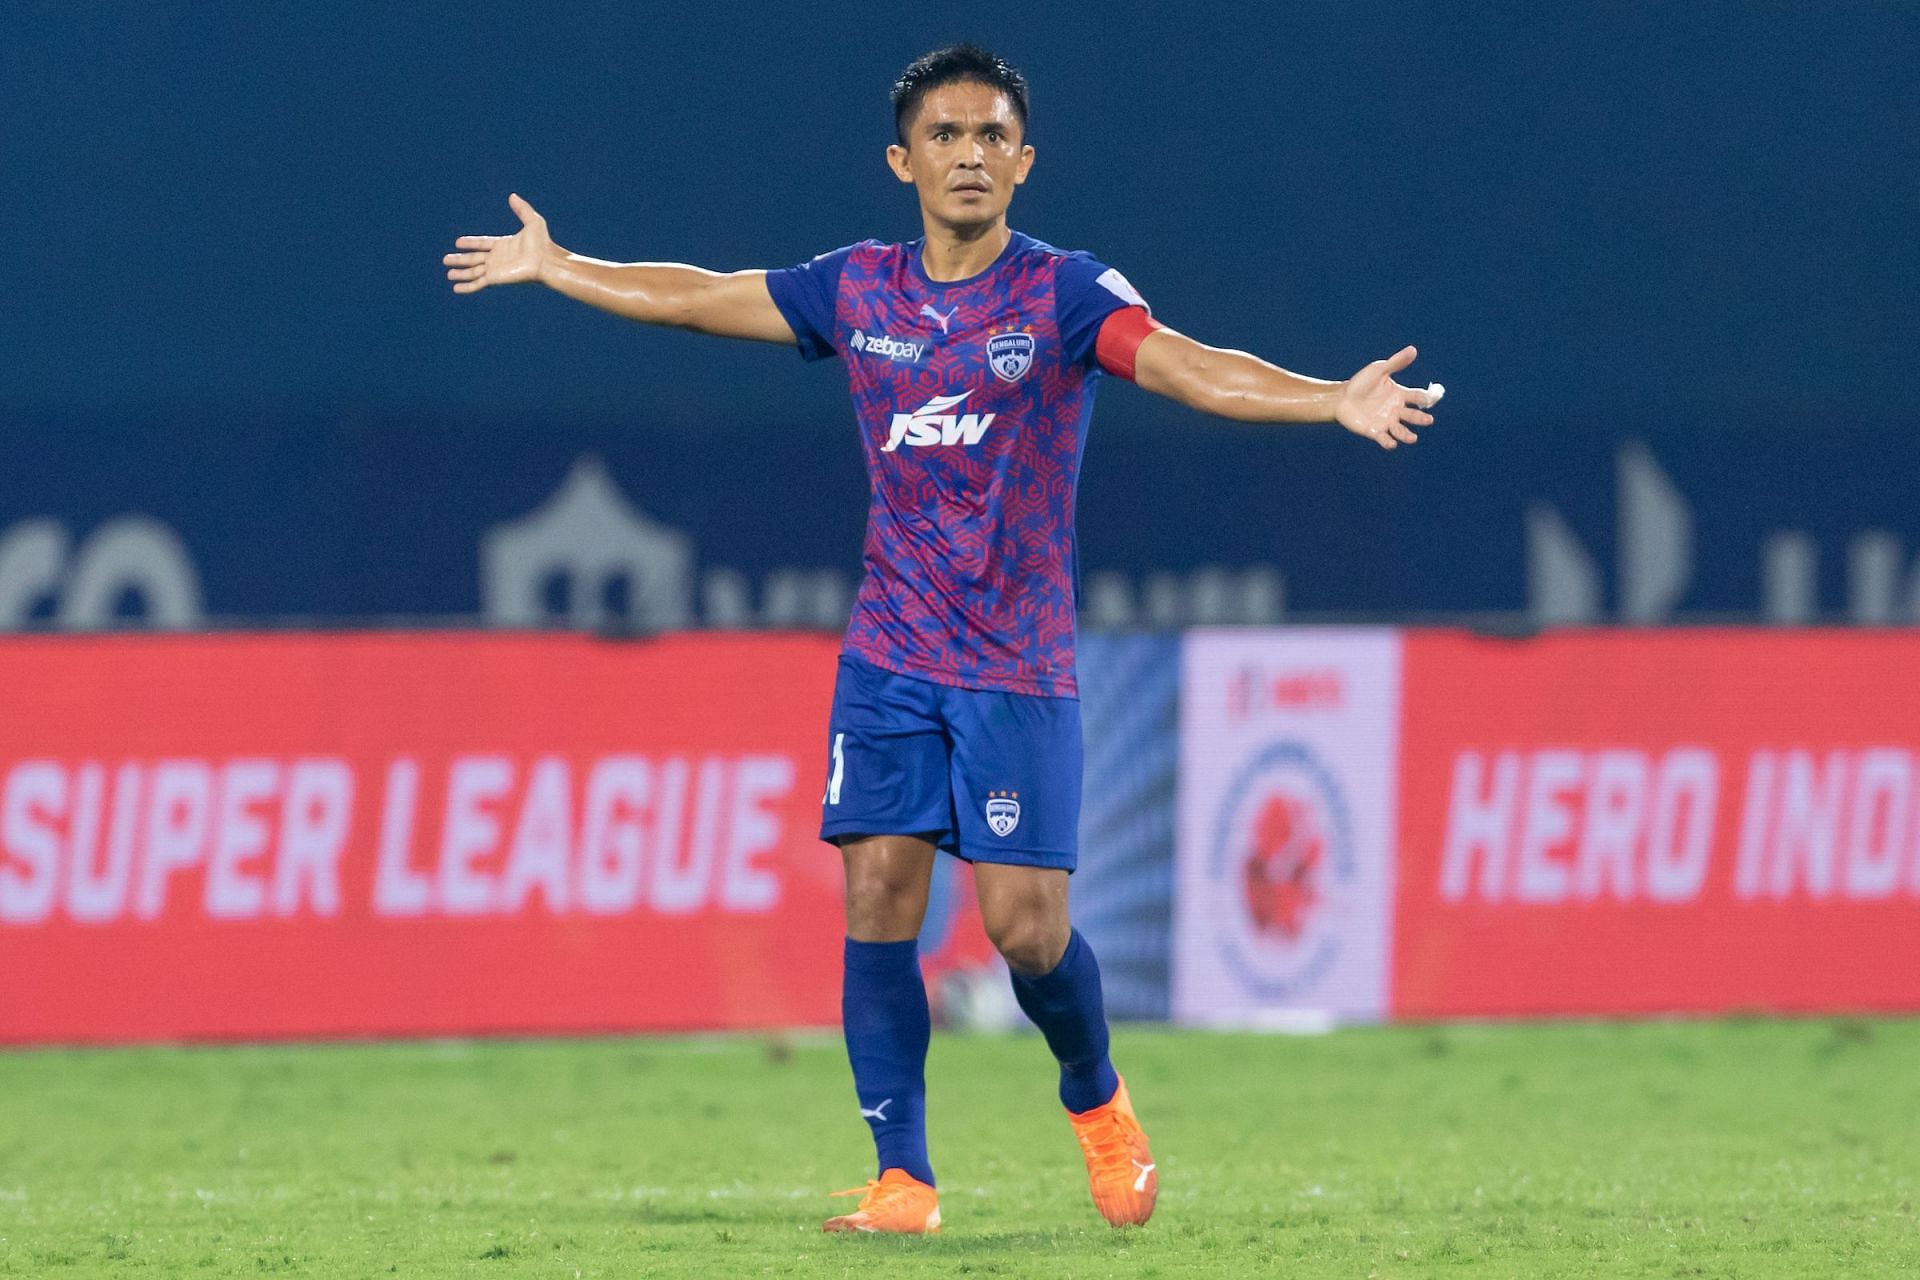 Bengaluru FC skipper has been one of the most influential forwards in the history of the ISL (Image Courtesy: ISL)